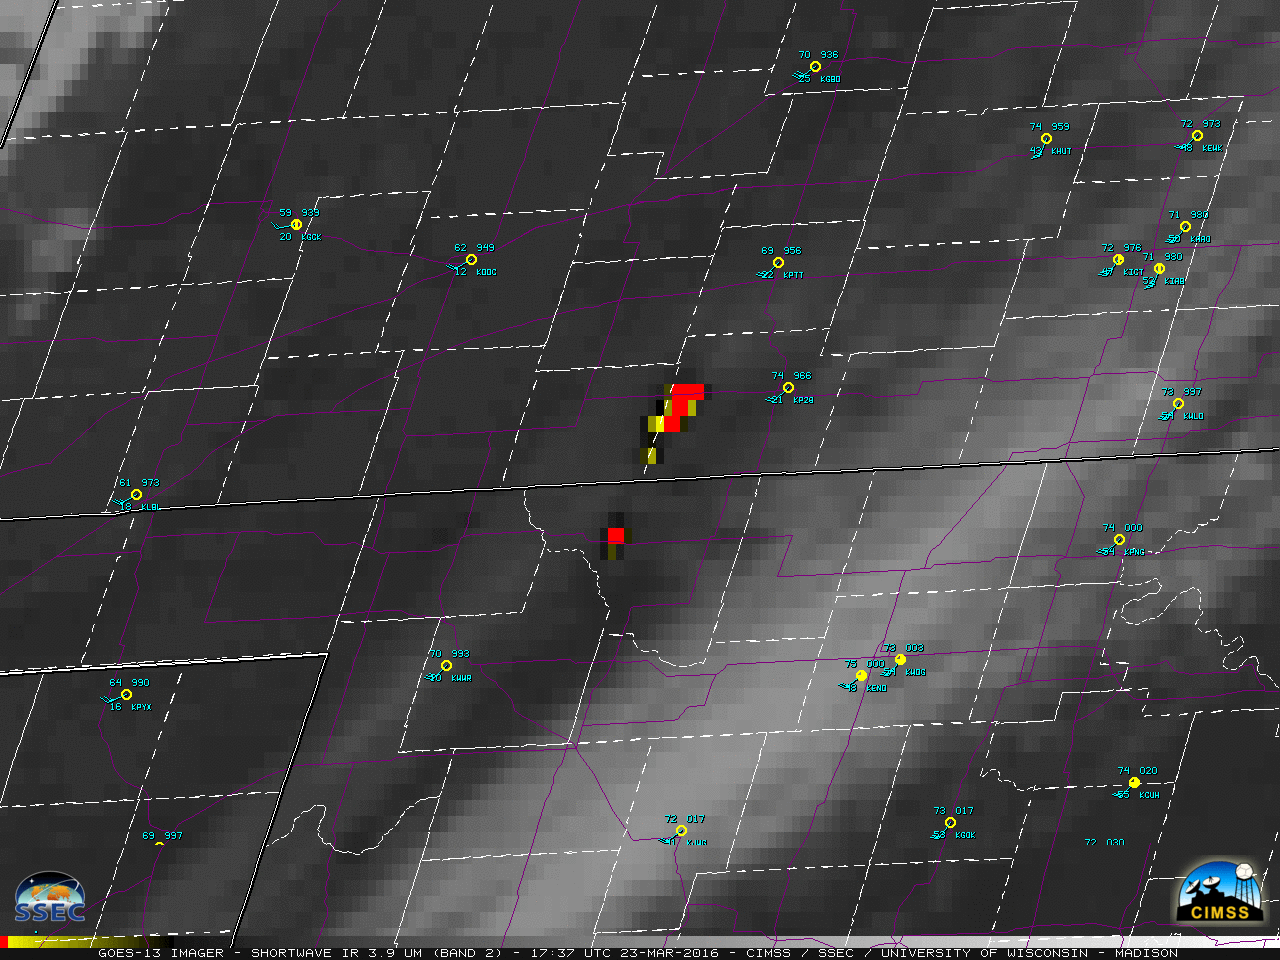 GOES-13 Shortwave Infrared (3.9 µm) images, with surface reports [click to play animation]